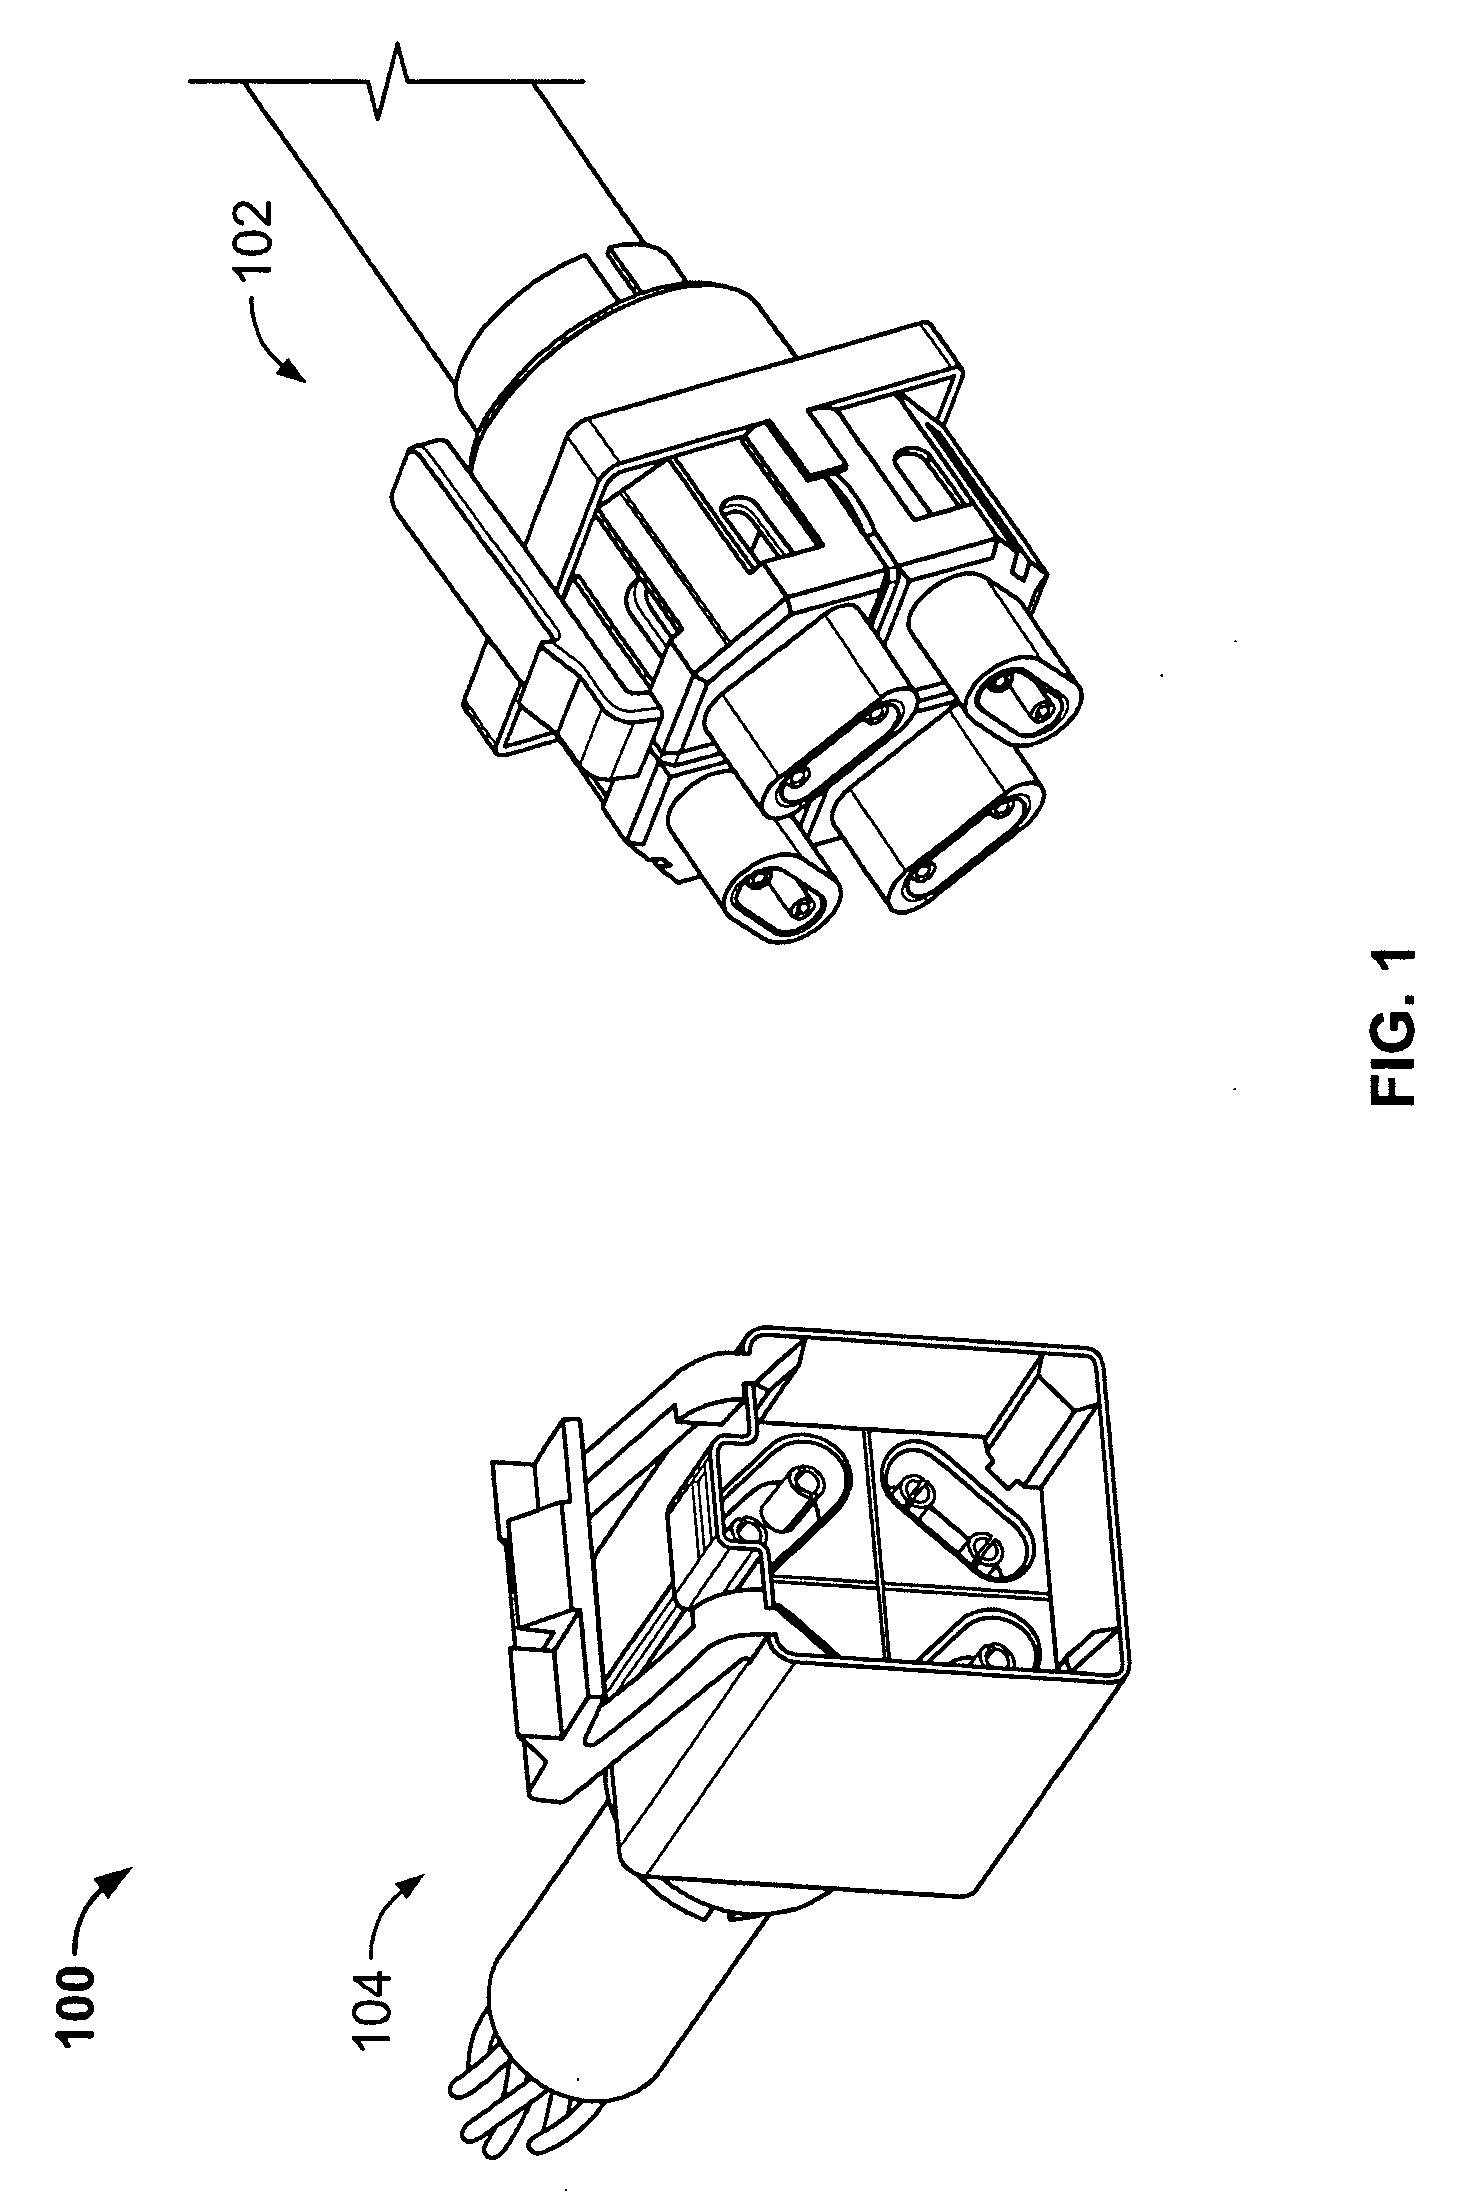 Electrical connector with enhanced jack interface